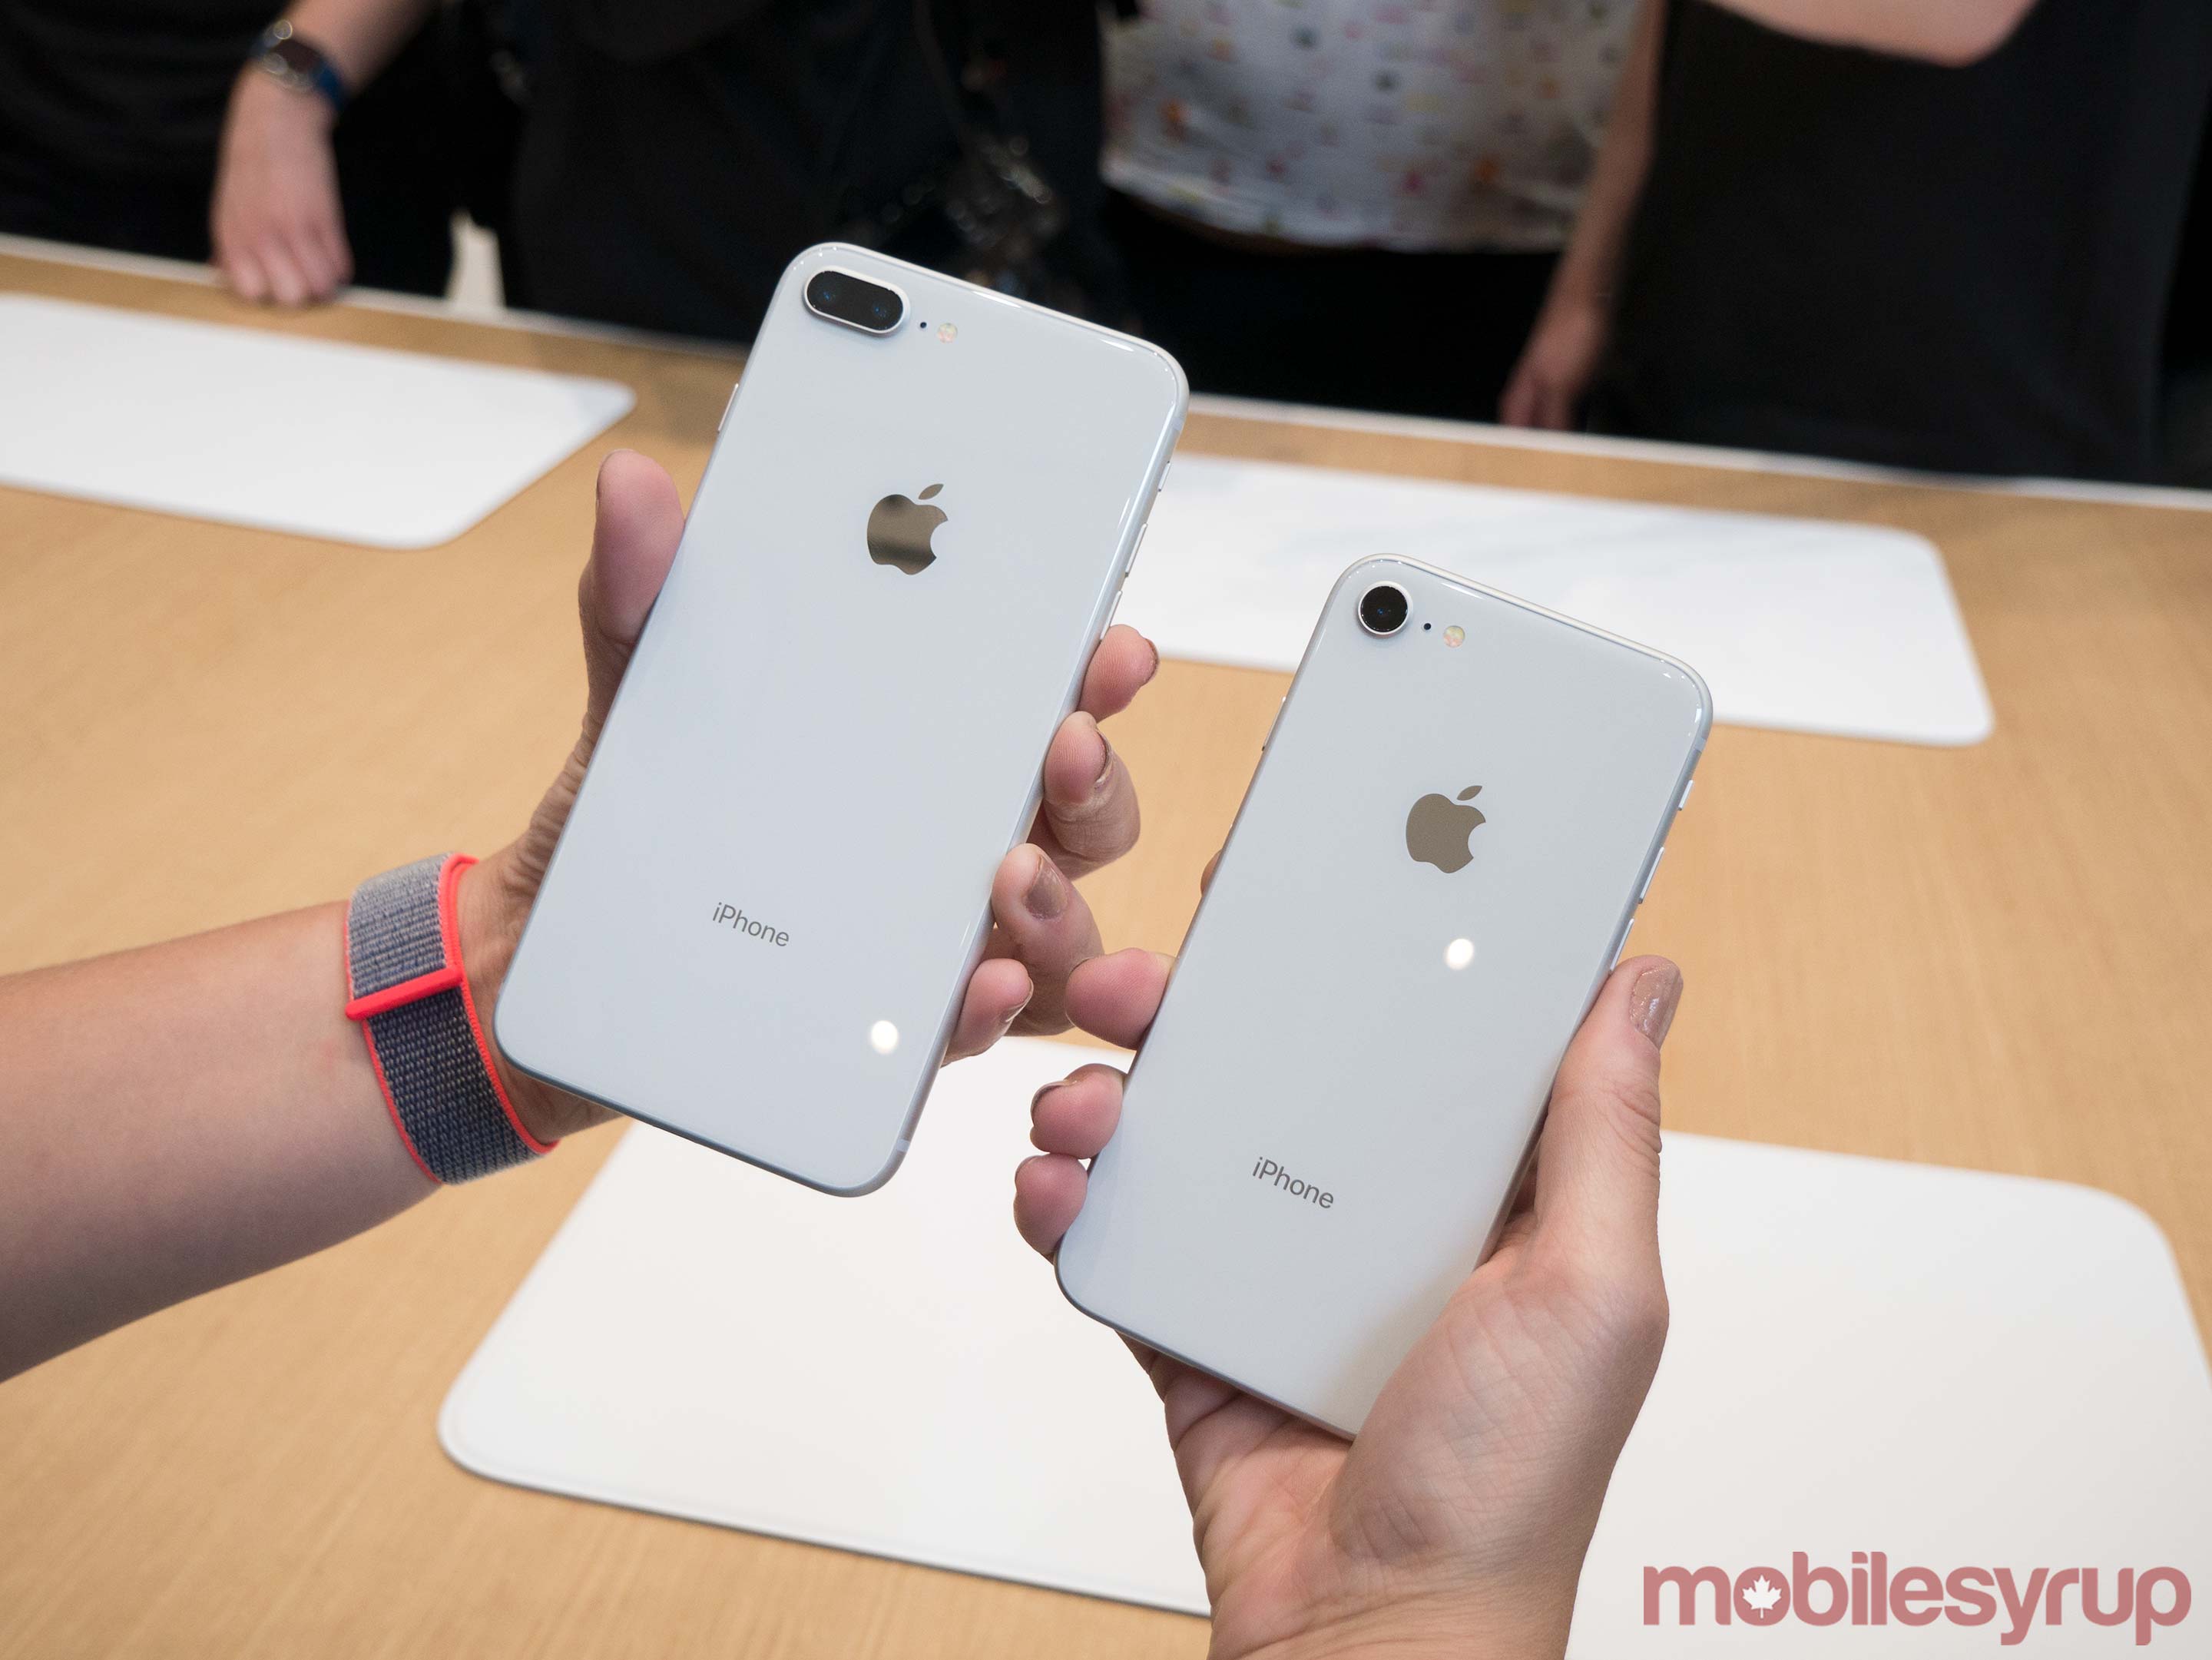 Comparison photo of the iPhone 8 Plus and iPhone 8 